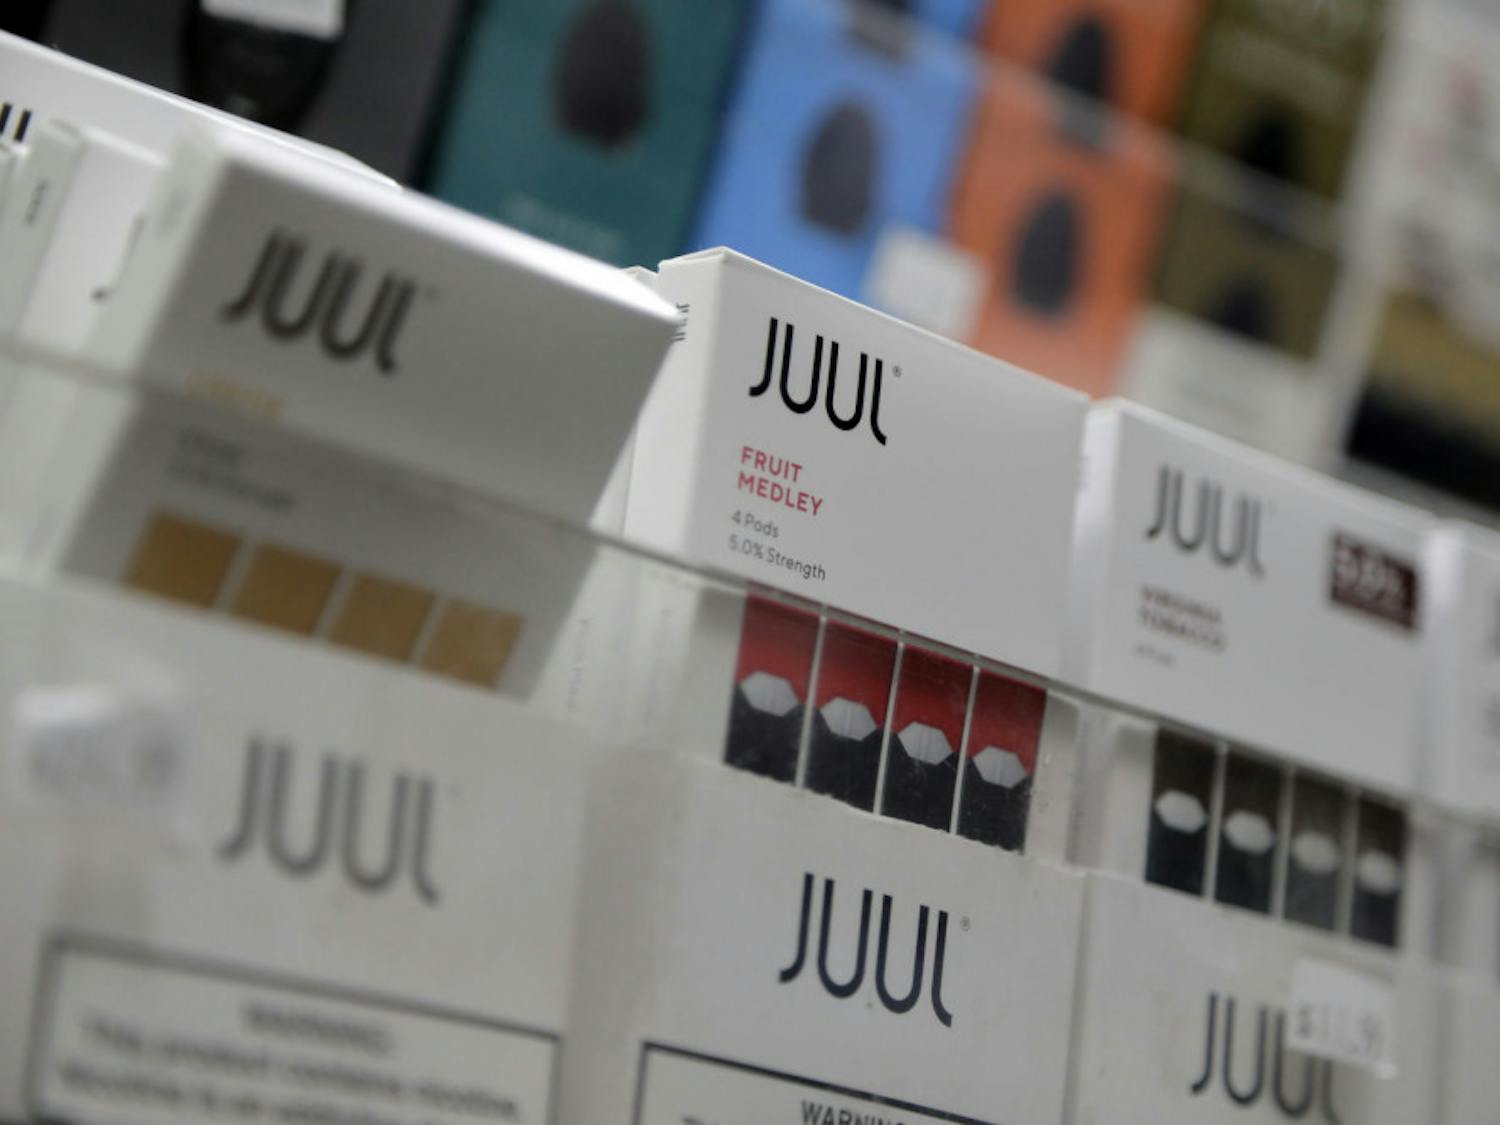 FILE - In this Dec. 20, 2018, file photo Juul products are displayed at a smoke shop in New York. Altria swung to a loss in the third quarter as it wrote down the value of its investment in e-cigarette maker Juul. Altria bought roughly a third of Juul for $13 billion last December. Since then, an outbreak of vaping illnesses - some deadly - has led to multiple investigations, with Juul no longer advertising its products in the U.S. (AP Photo/Seth Wenig, File)